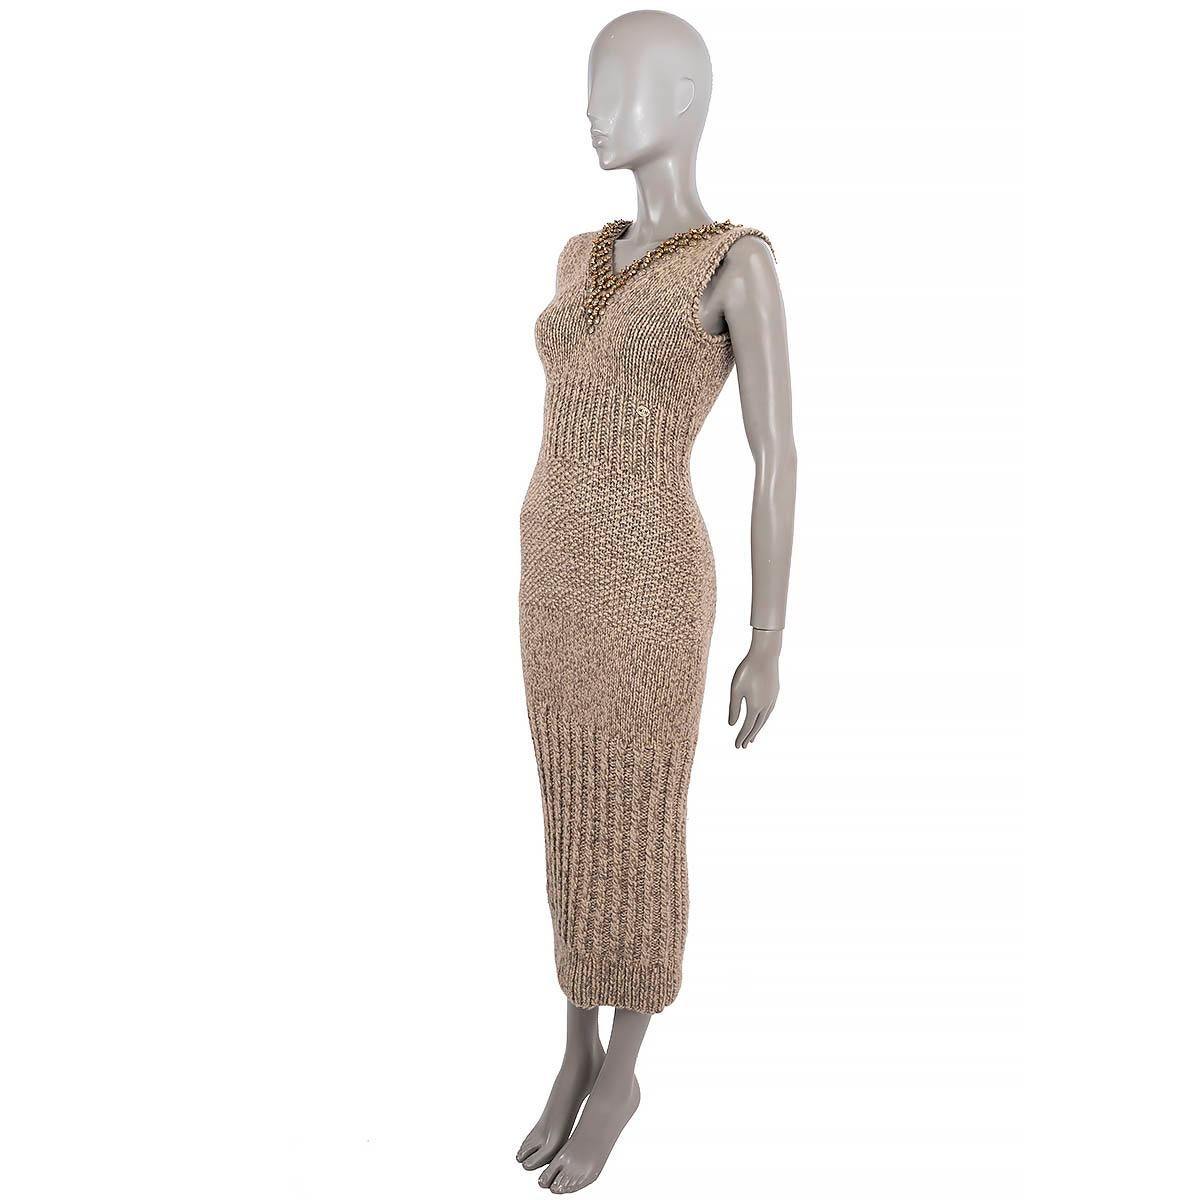 100% authentic Chanel casual dress in beige and metalic cashmere (95%), polyester (3%) and 1% polyamide with beading details. Has been worn and is in excellent condition.

Measurements
Model	07A P31409 K00507
Tag Size	36
Size	XS
Bust	64cm (25in) to